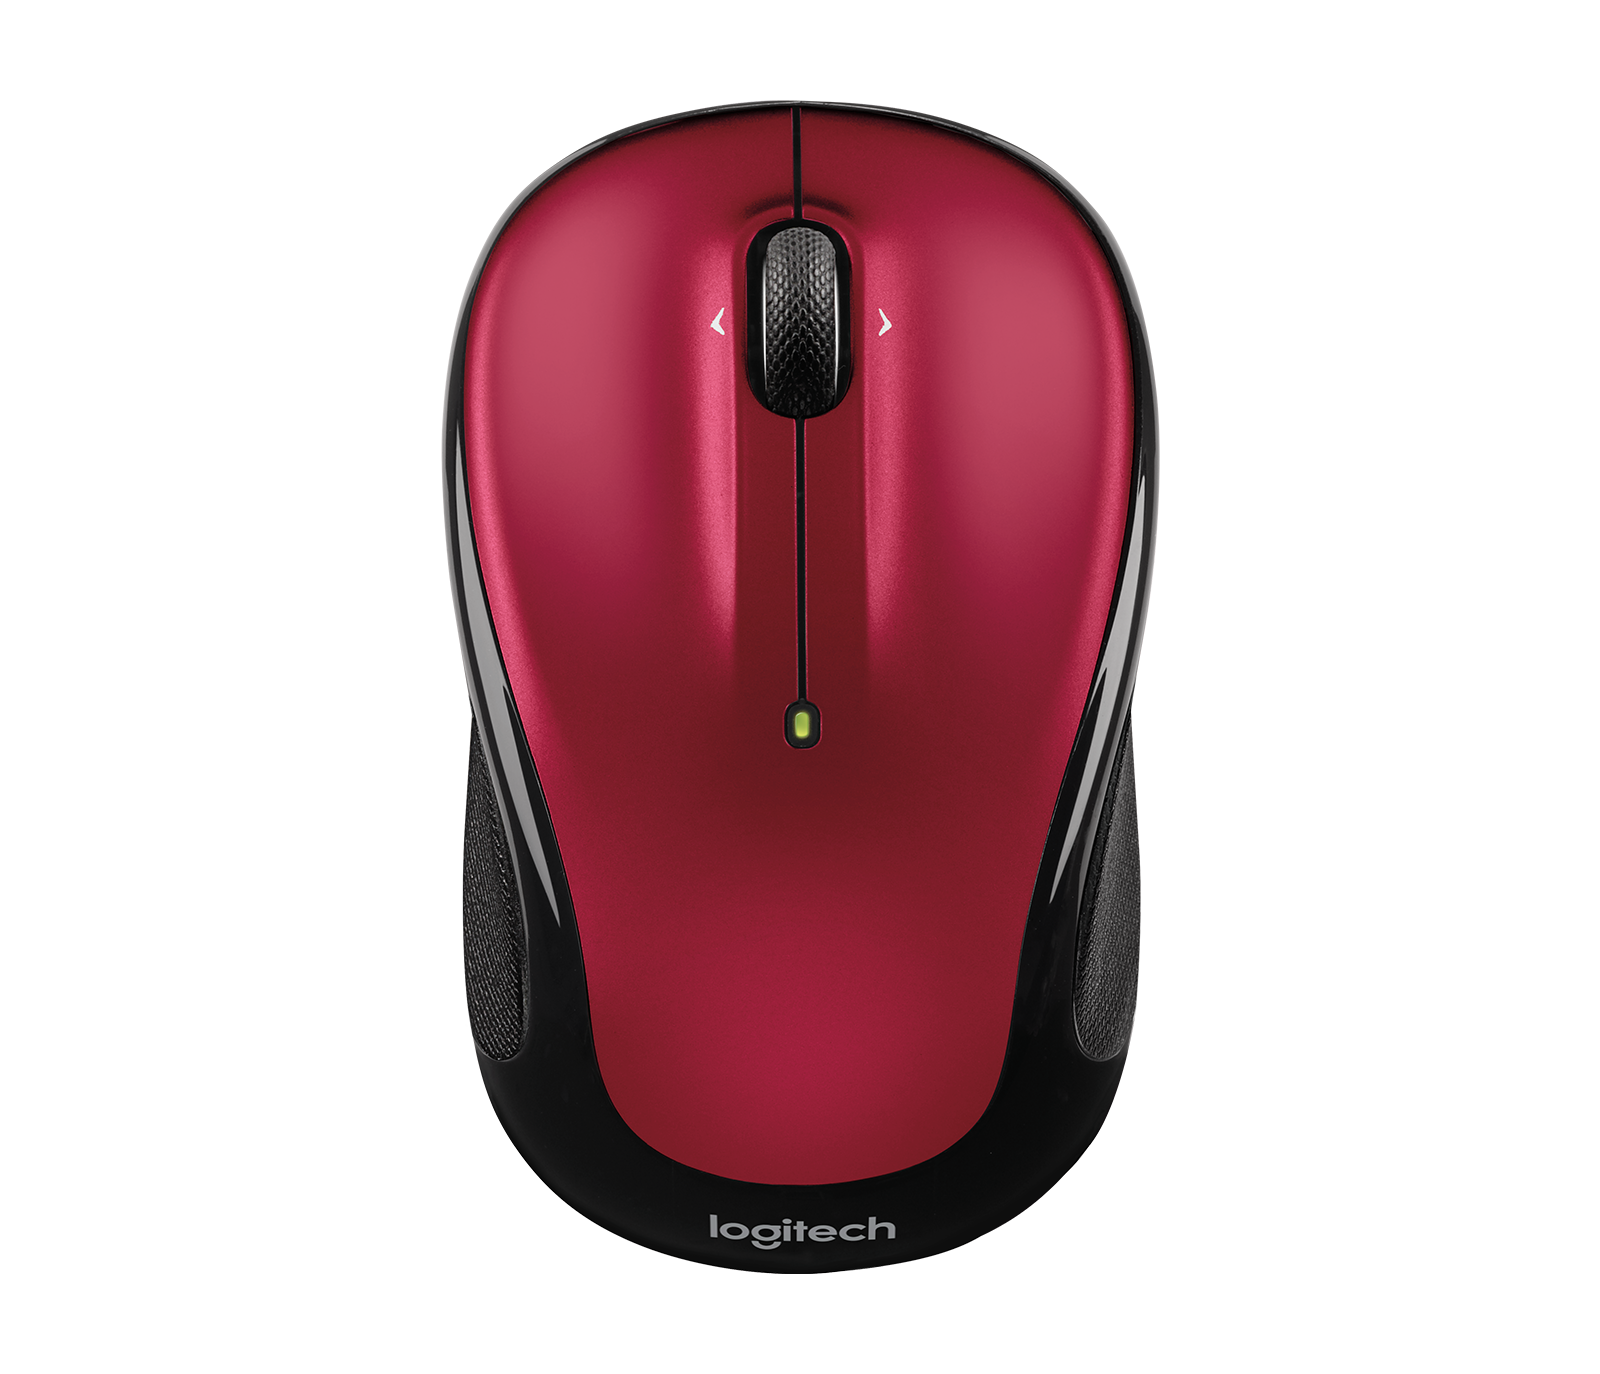 Brilliant Rose Logitech M325 Wireless Mouse for Web Scrolling